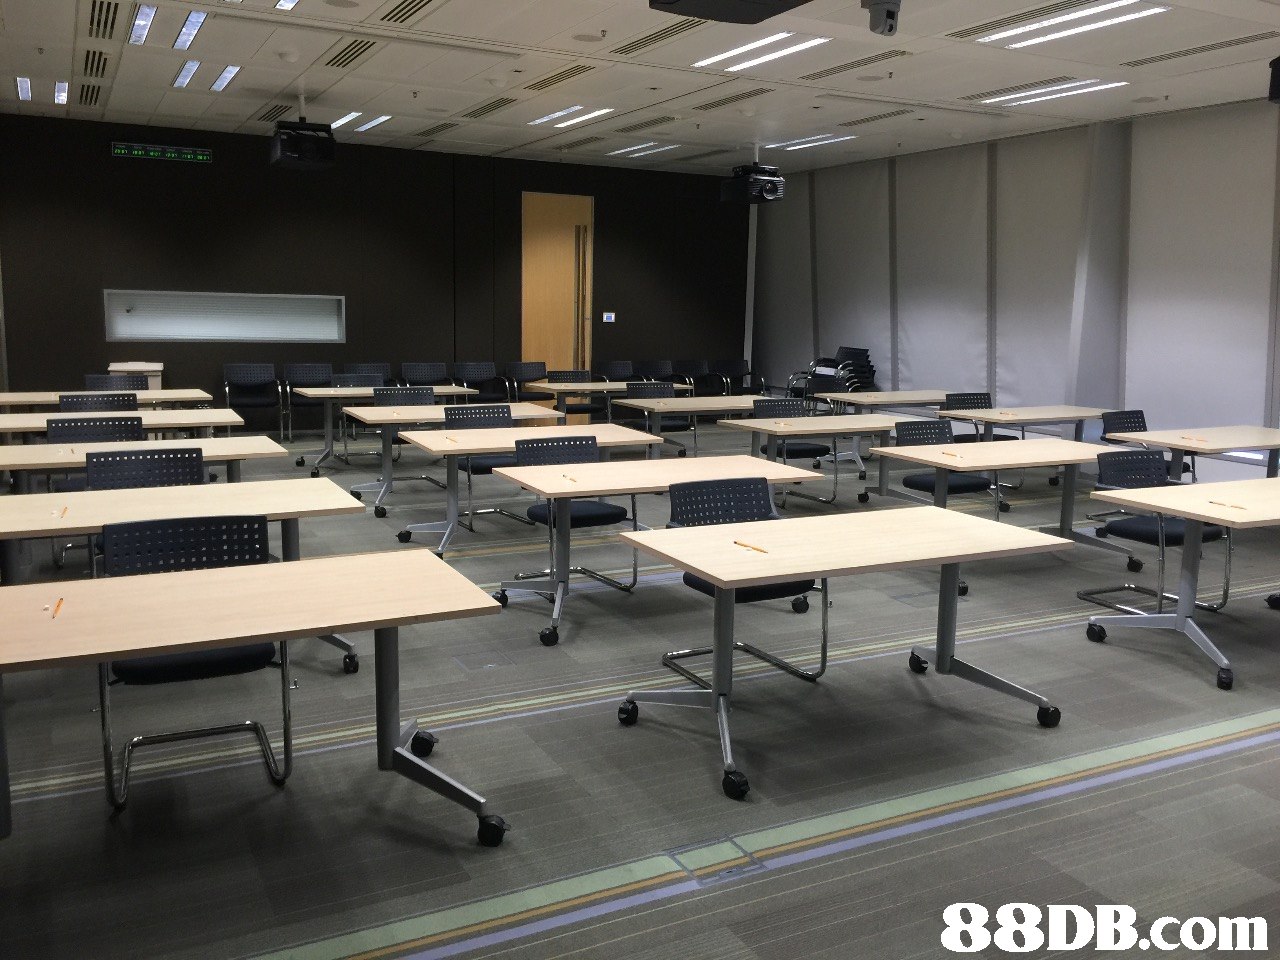   classroom,table,conference hall,furniture,